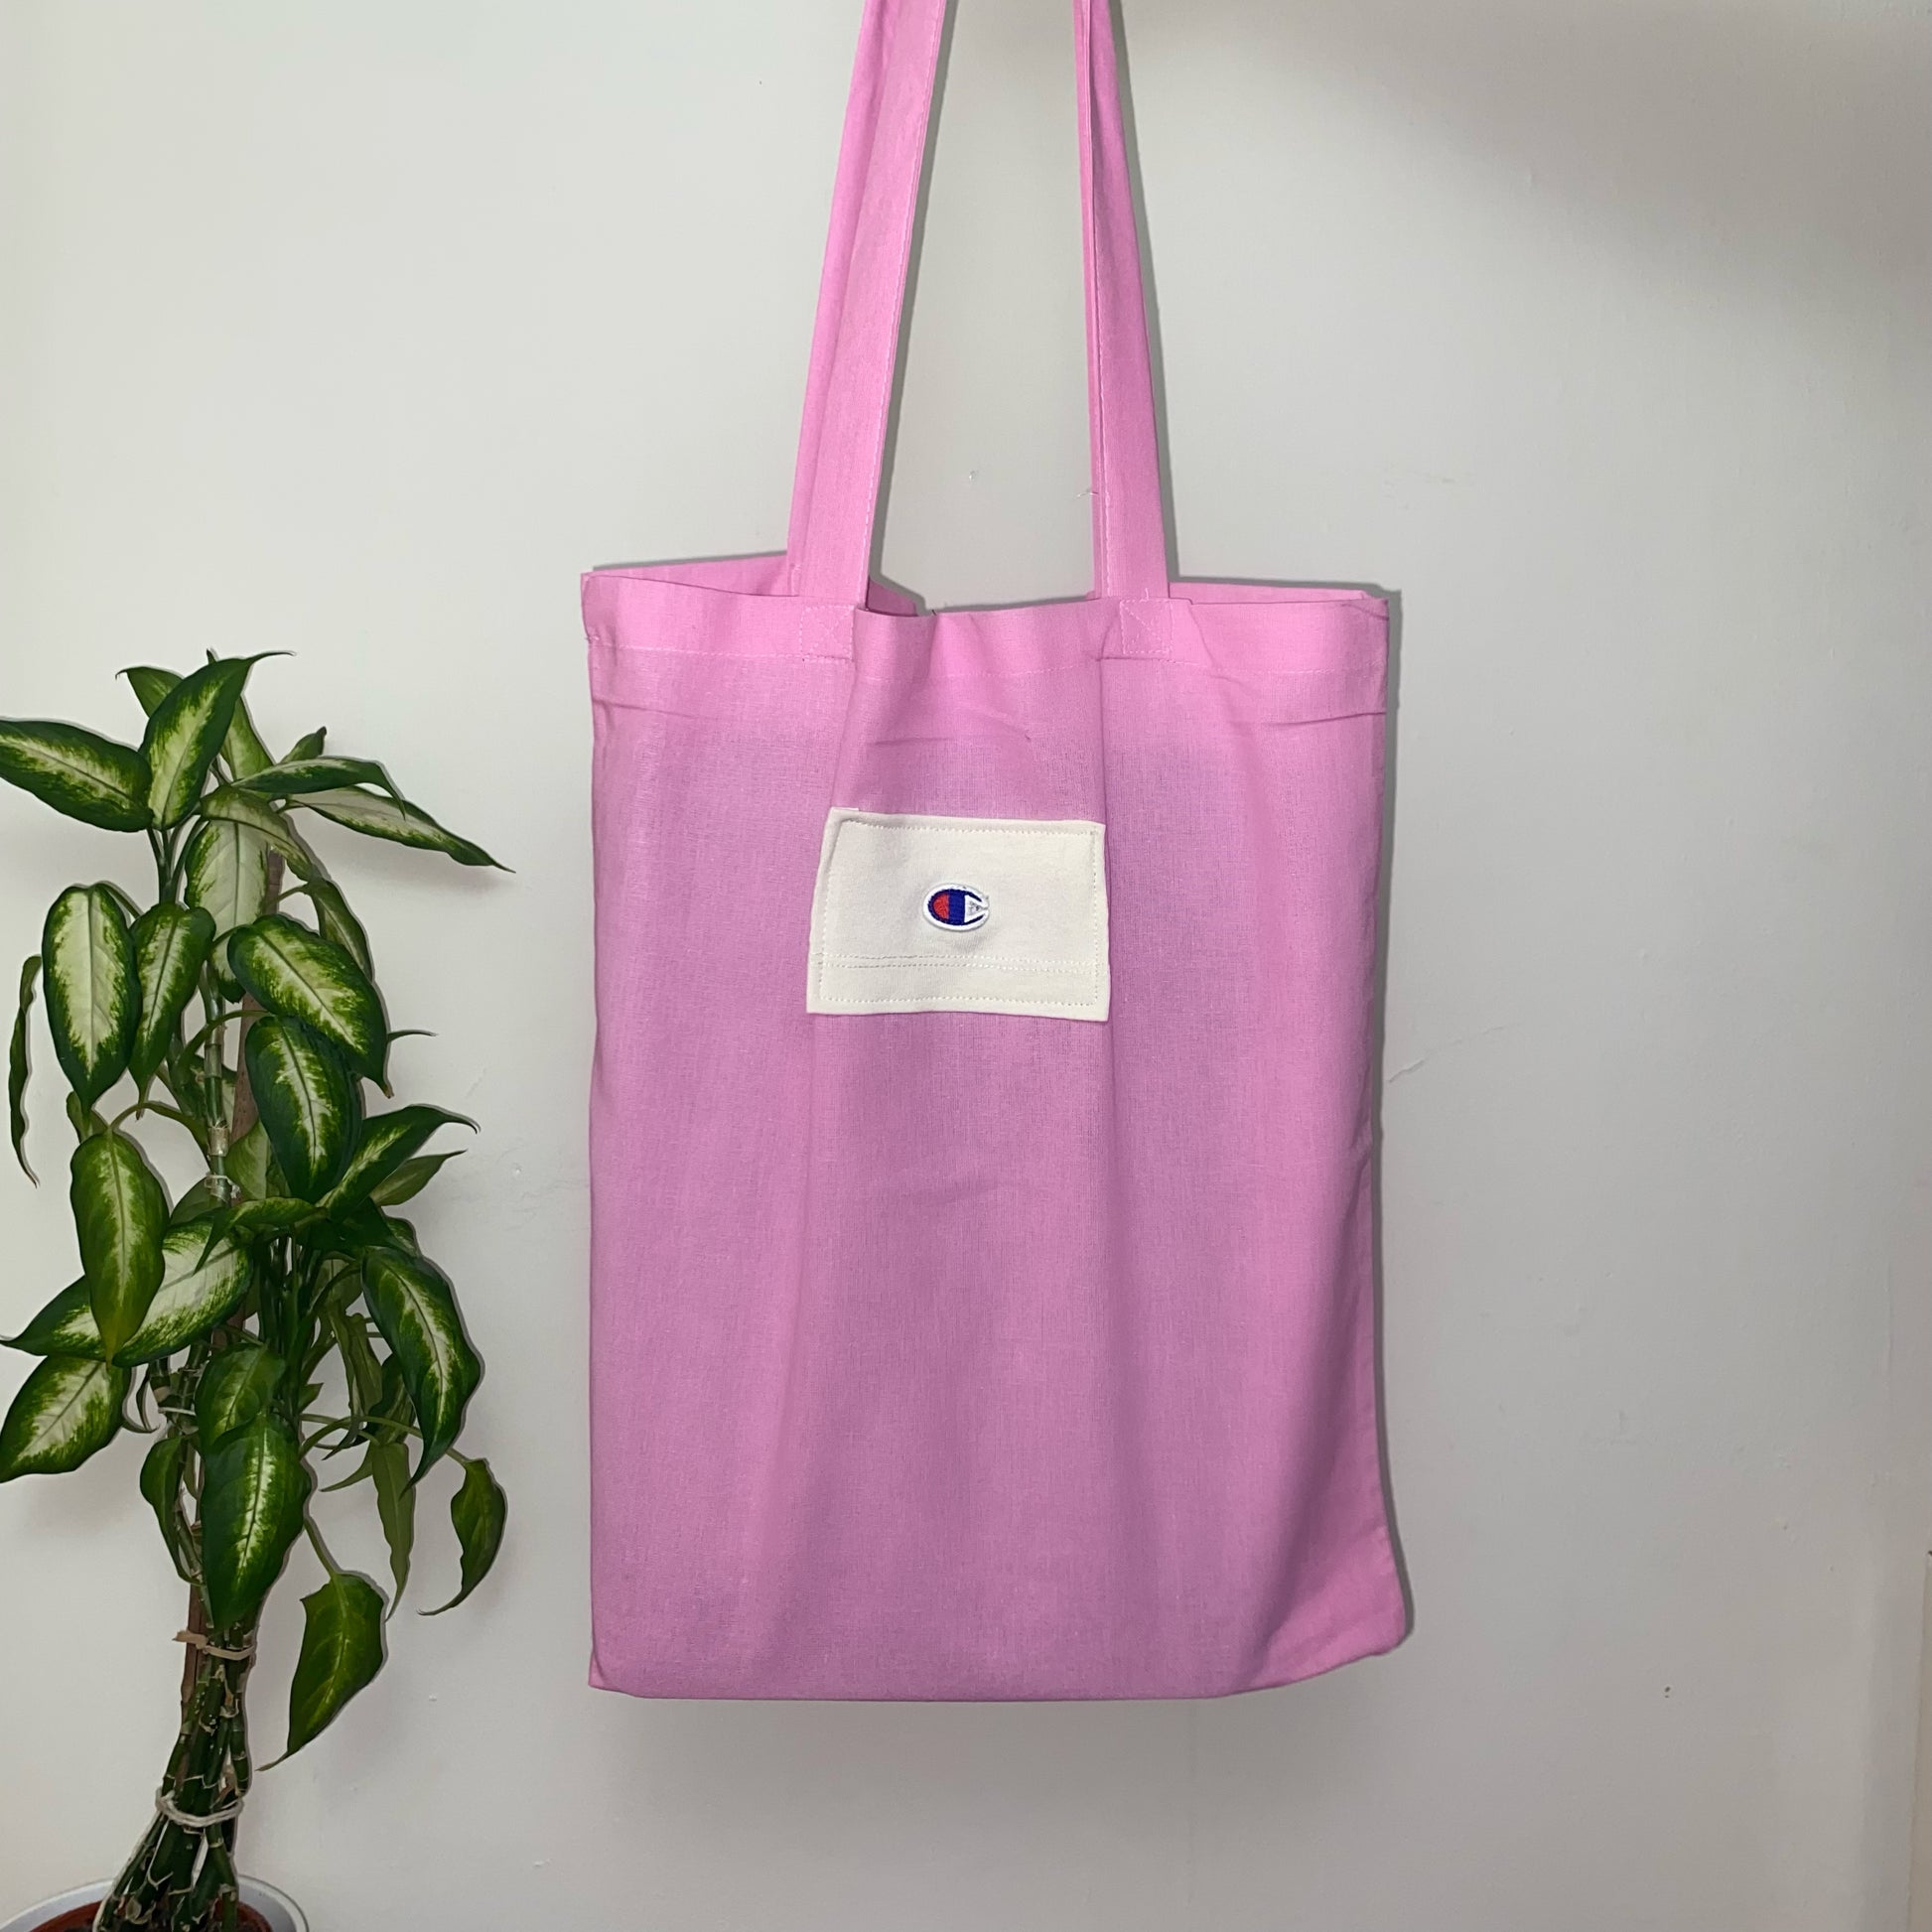 light pink tote bag with blue and red champion logo